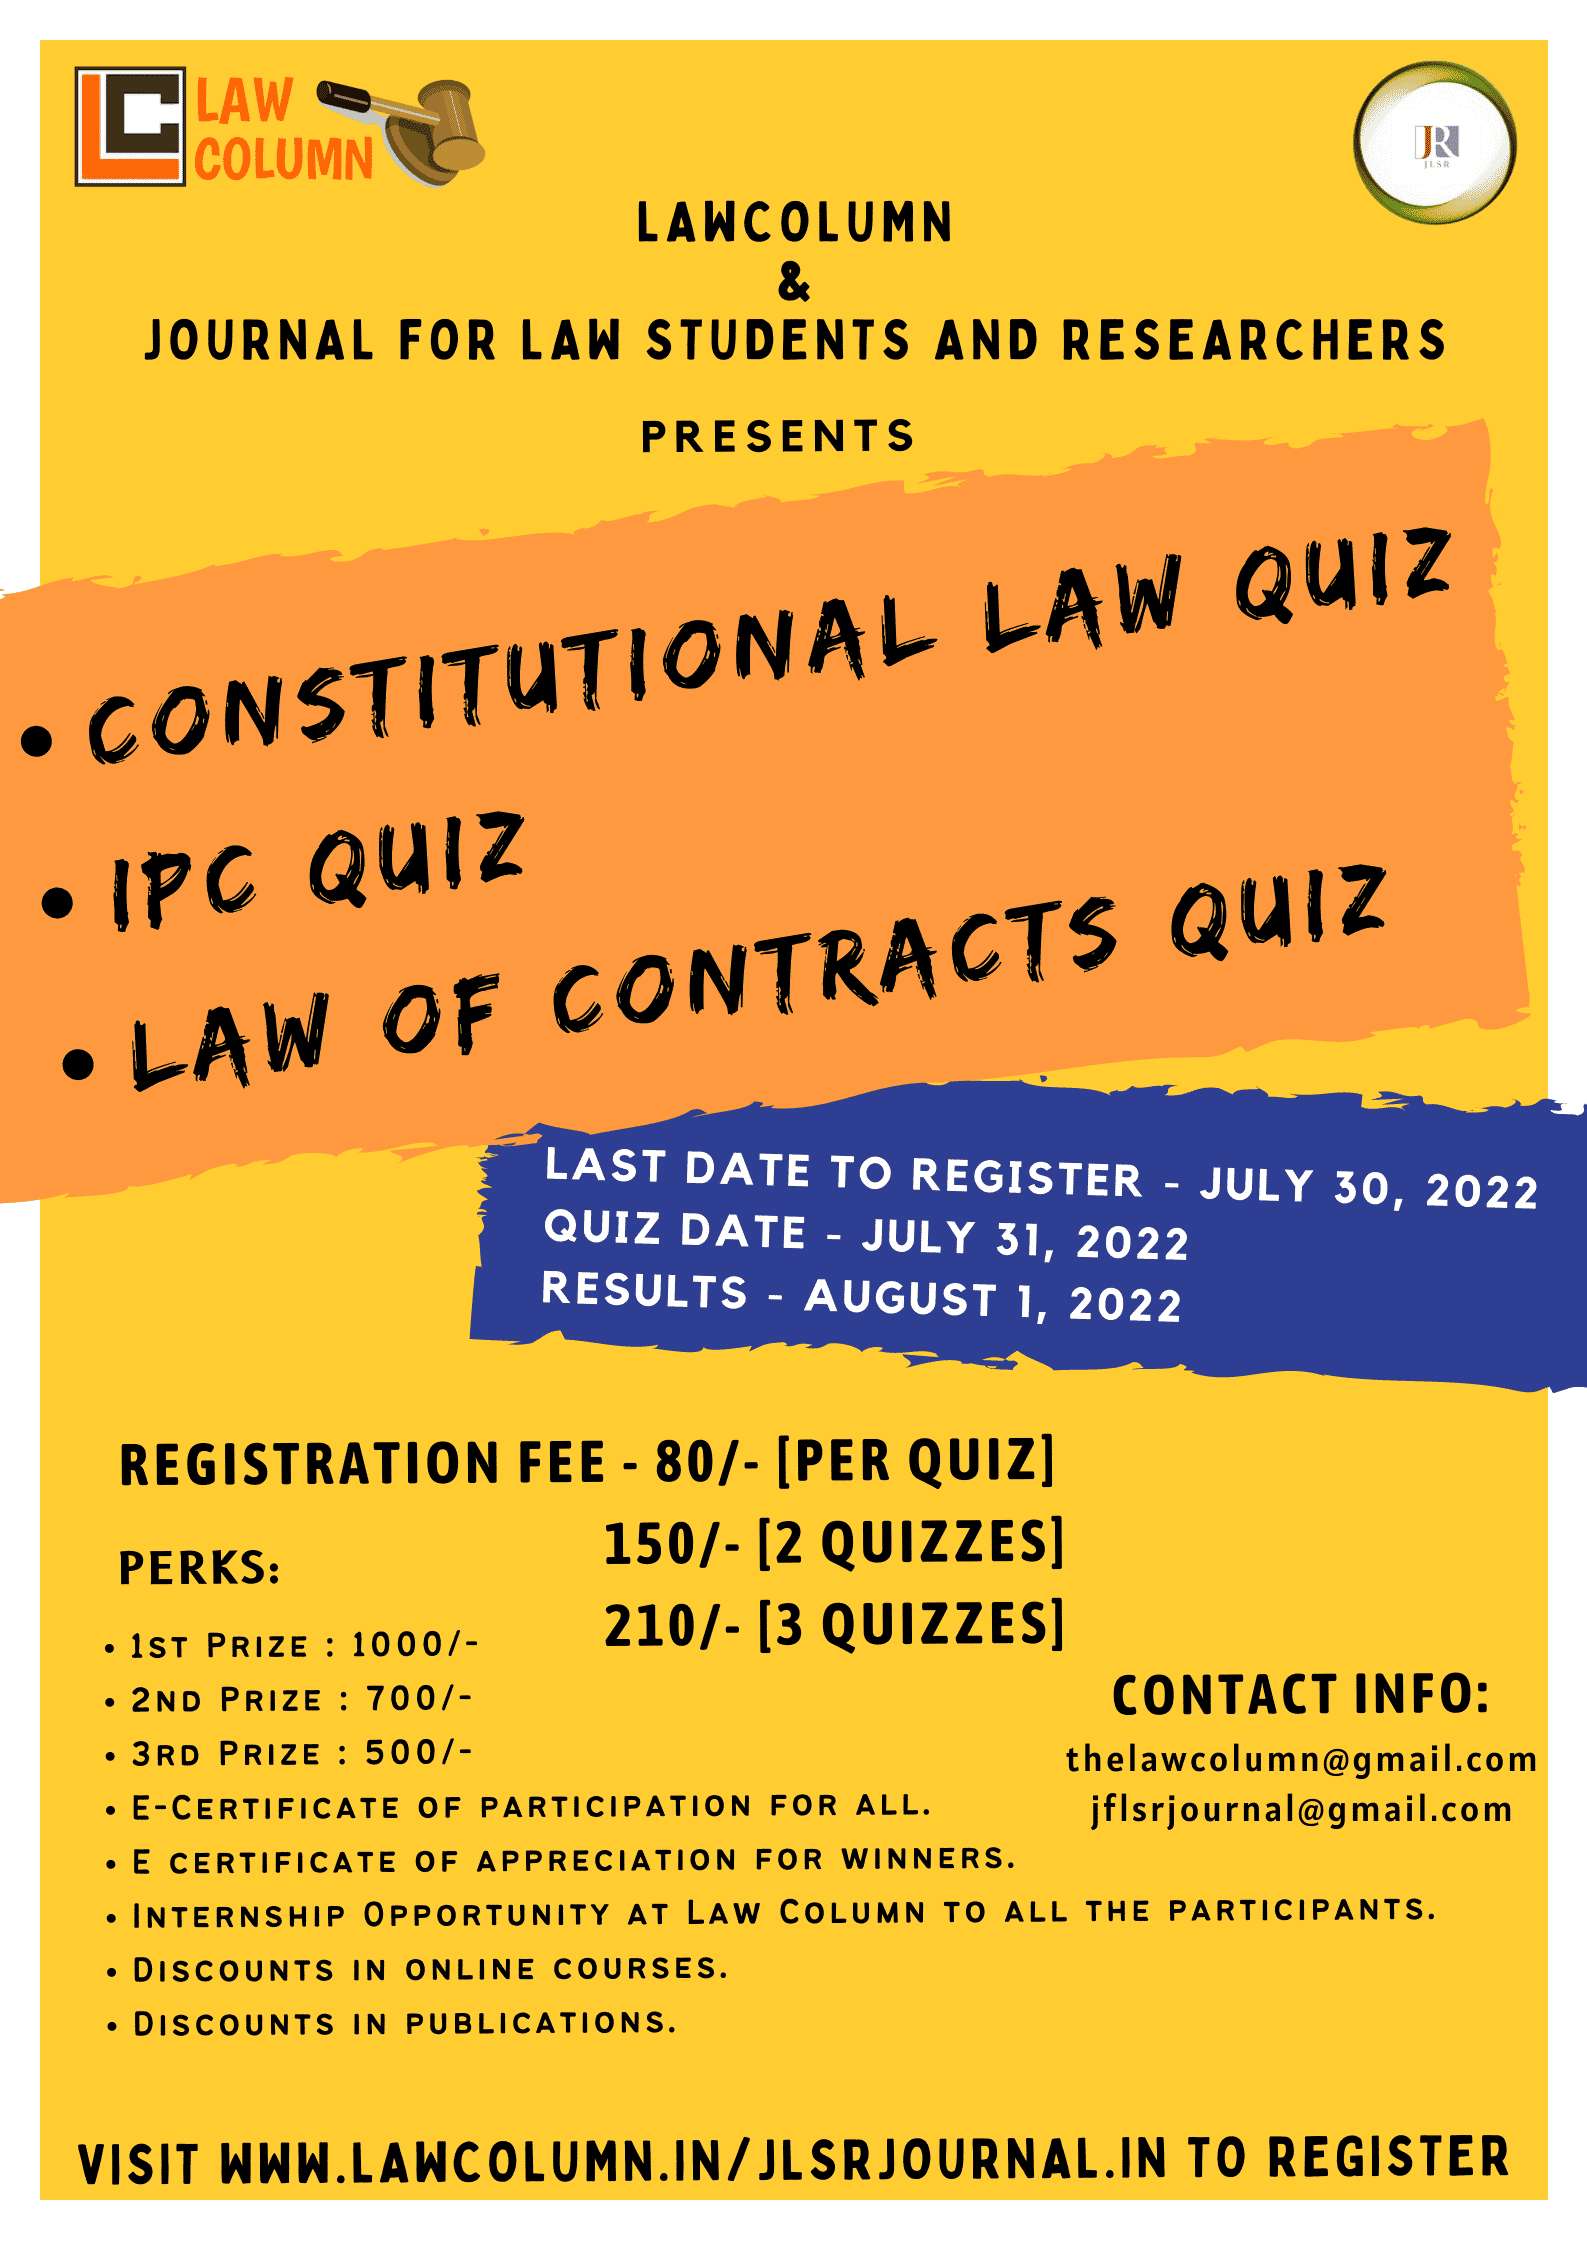 ONLINE QUIZ COMPETITION ON LAW OF CONTRACTS, IPC & CONSTITUTION [JULY 31ST,2022] BY LAW COLUMN IN ASSOCIATION WITH JLSR : REGISTER BY JULY 30TH, 2022